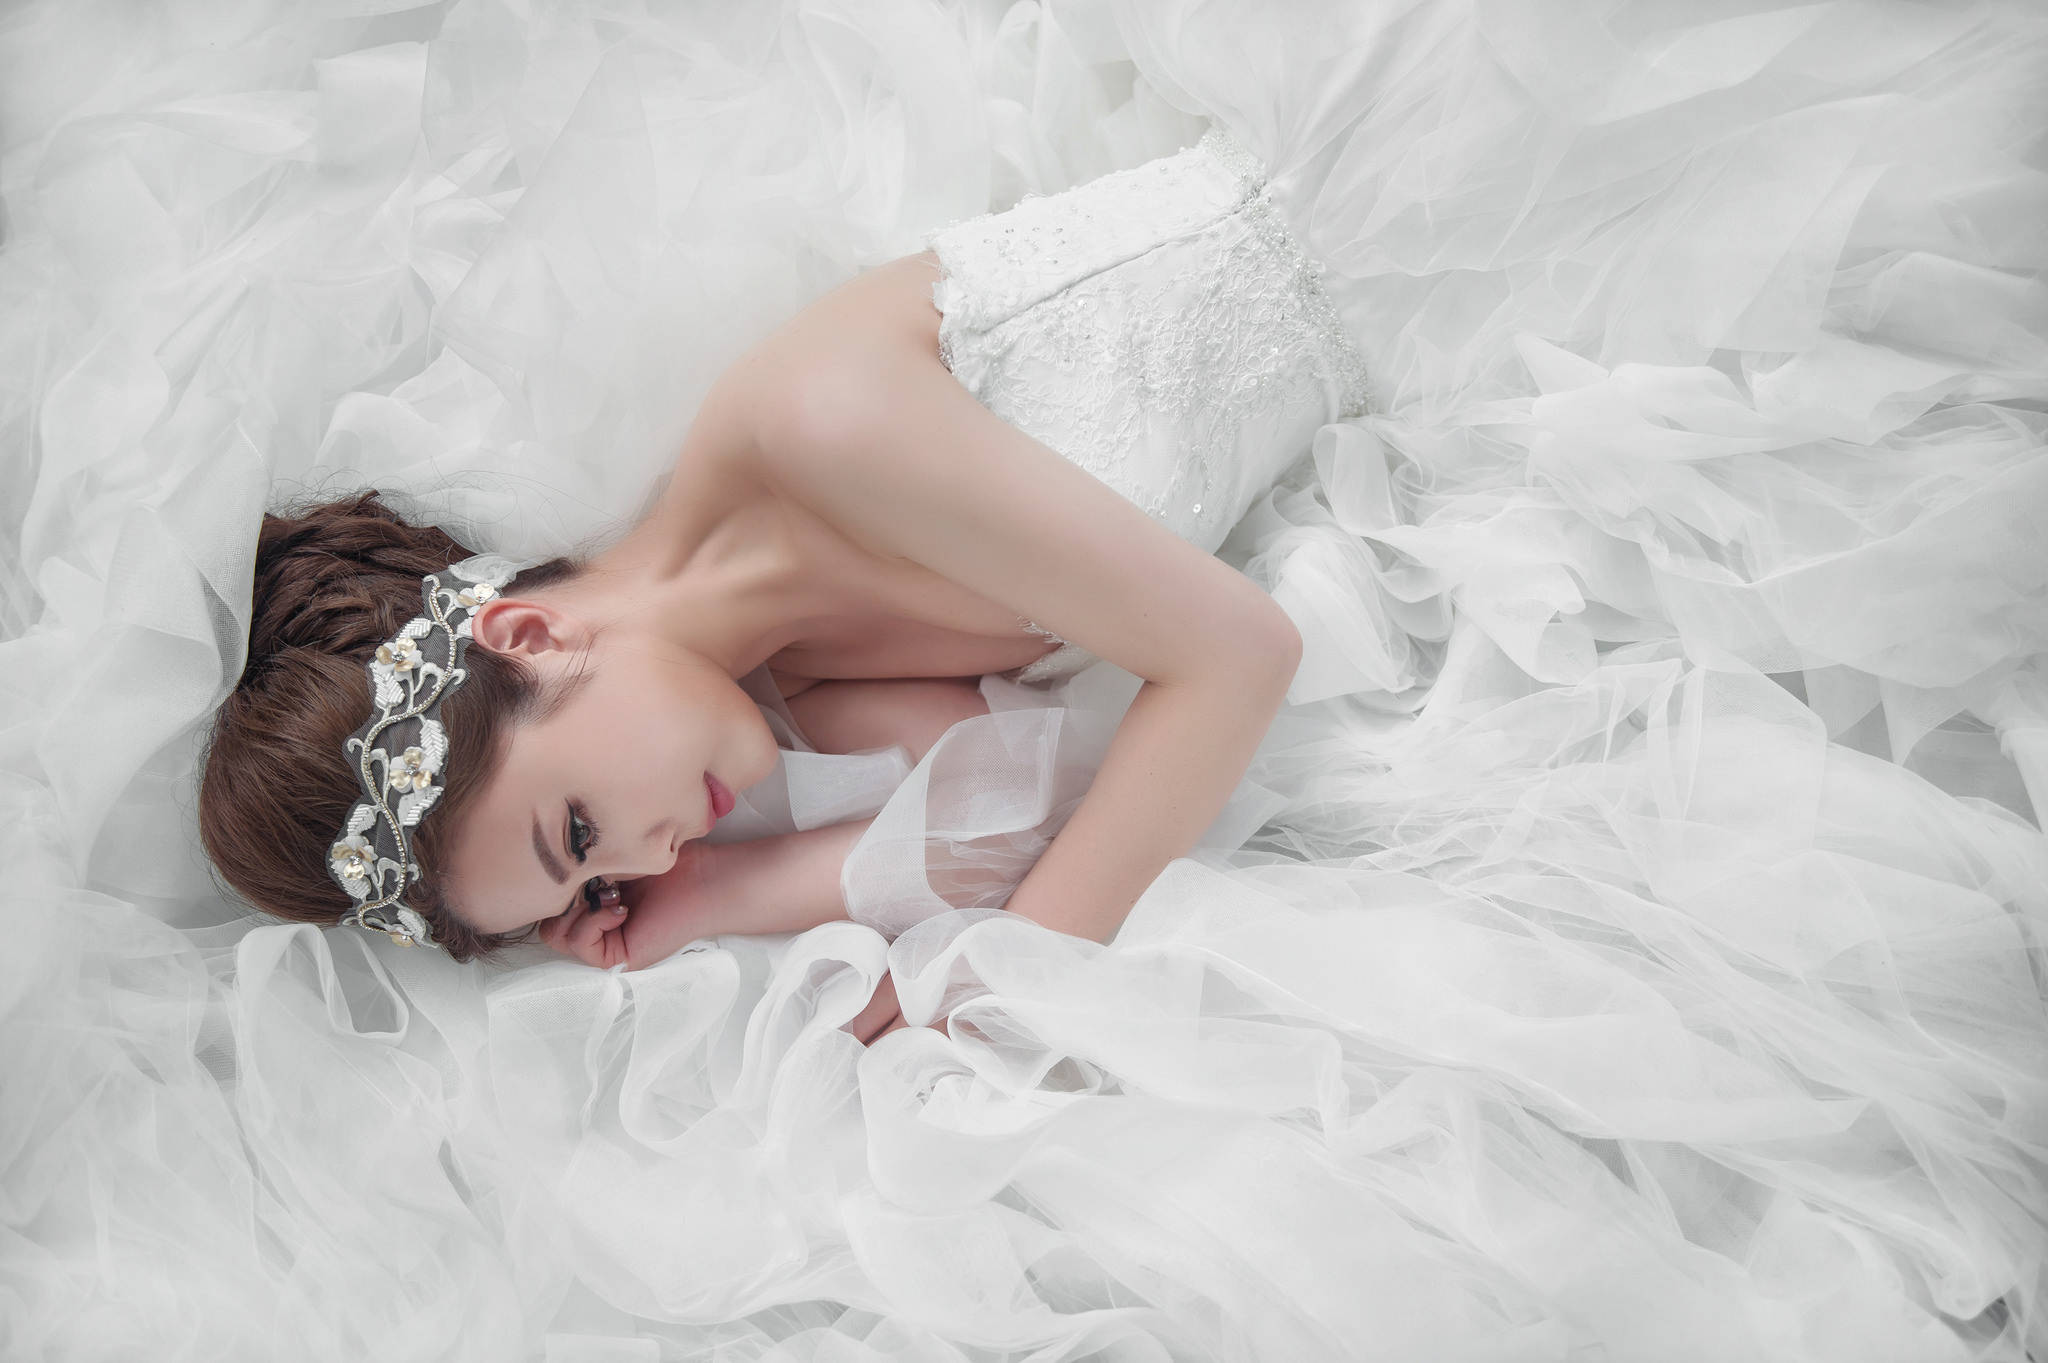 A woman laying on top of white fabric - Wedding